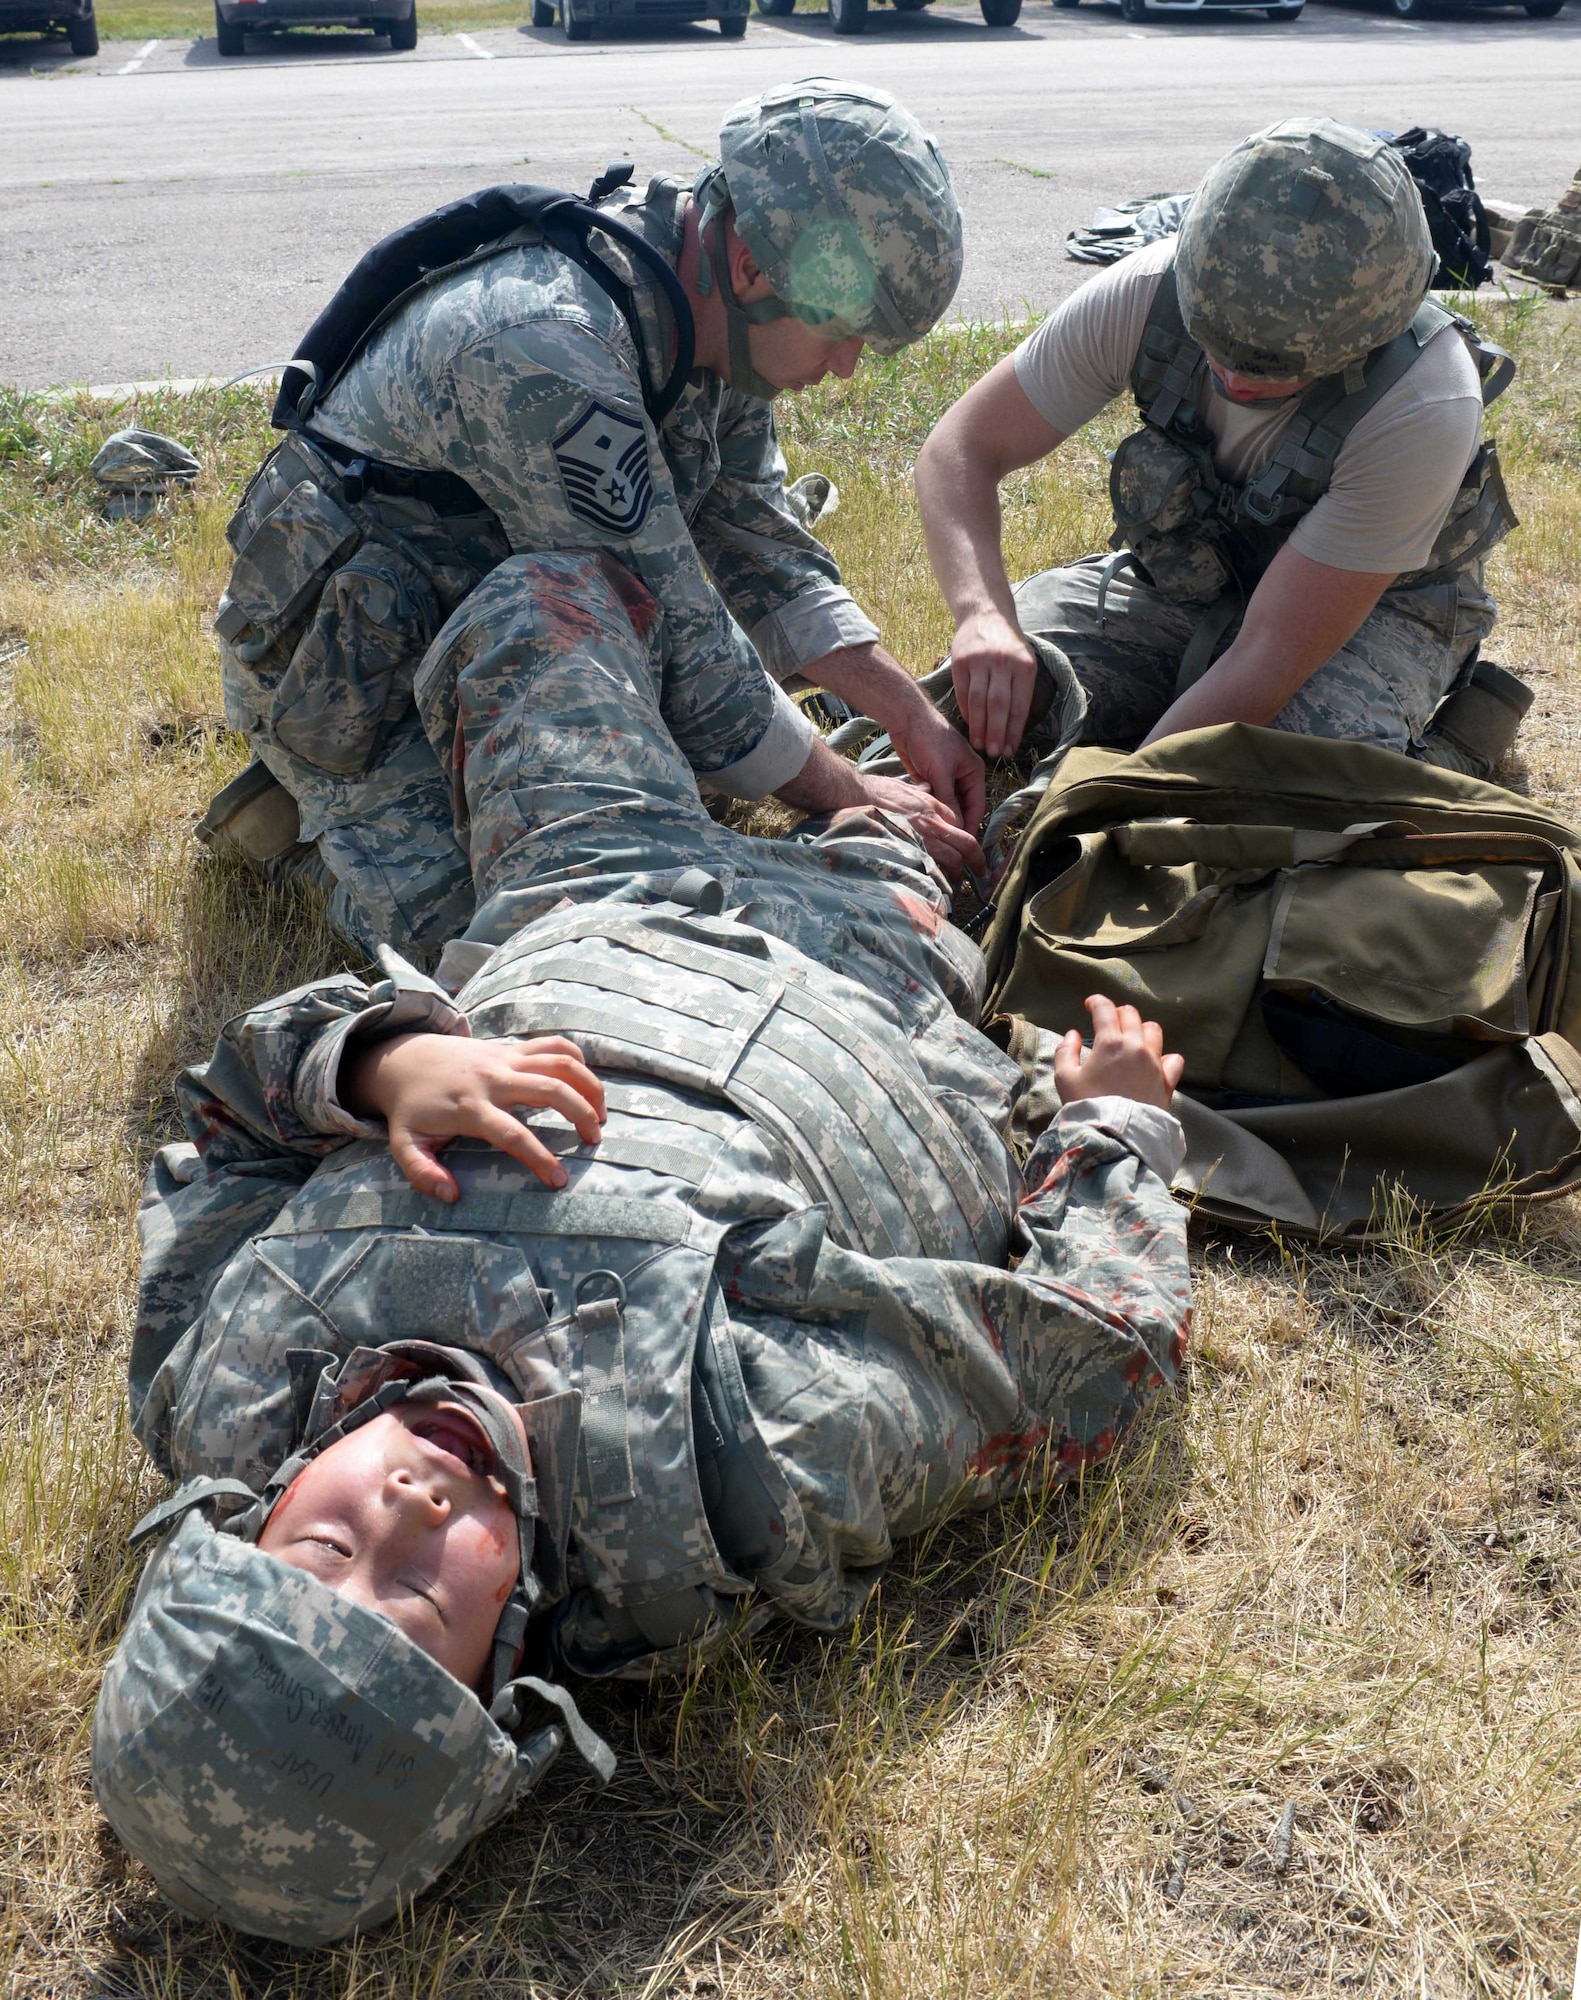 Airmen treat wounds on a volunteer casualty at the Self Aid Buddy Care (SABC) station during the Prime Base Engineer Emergency Force challenge at Ellsworth Air Force Base, S.D., July 22, 2016. The Prime BEEF challenge was created to put field experience to the test in a competitive environment. (U.S. Air Force photo by Airman Donald Knechtel) 